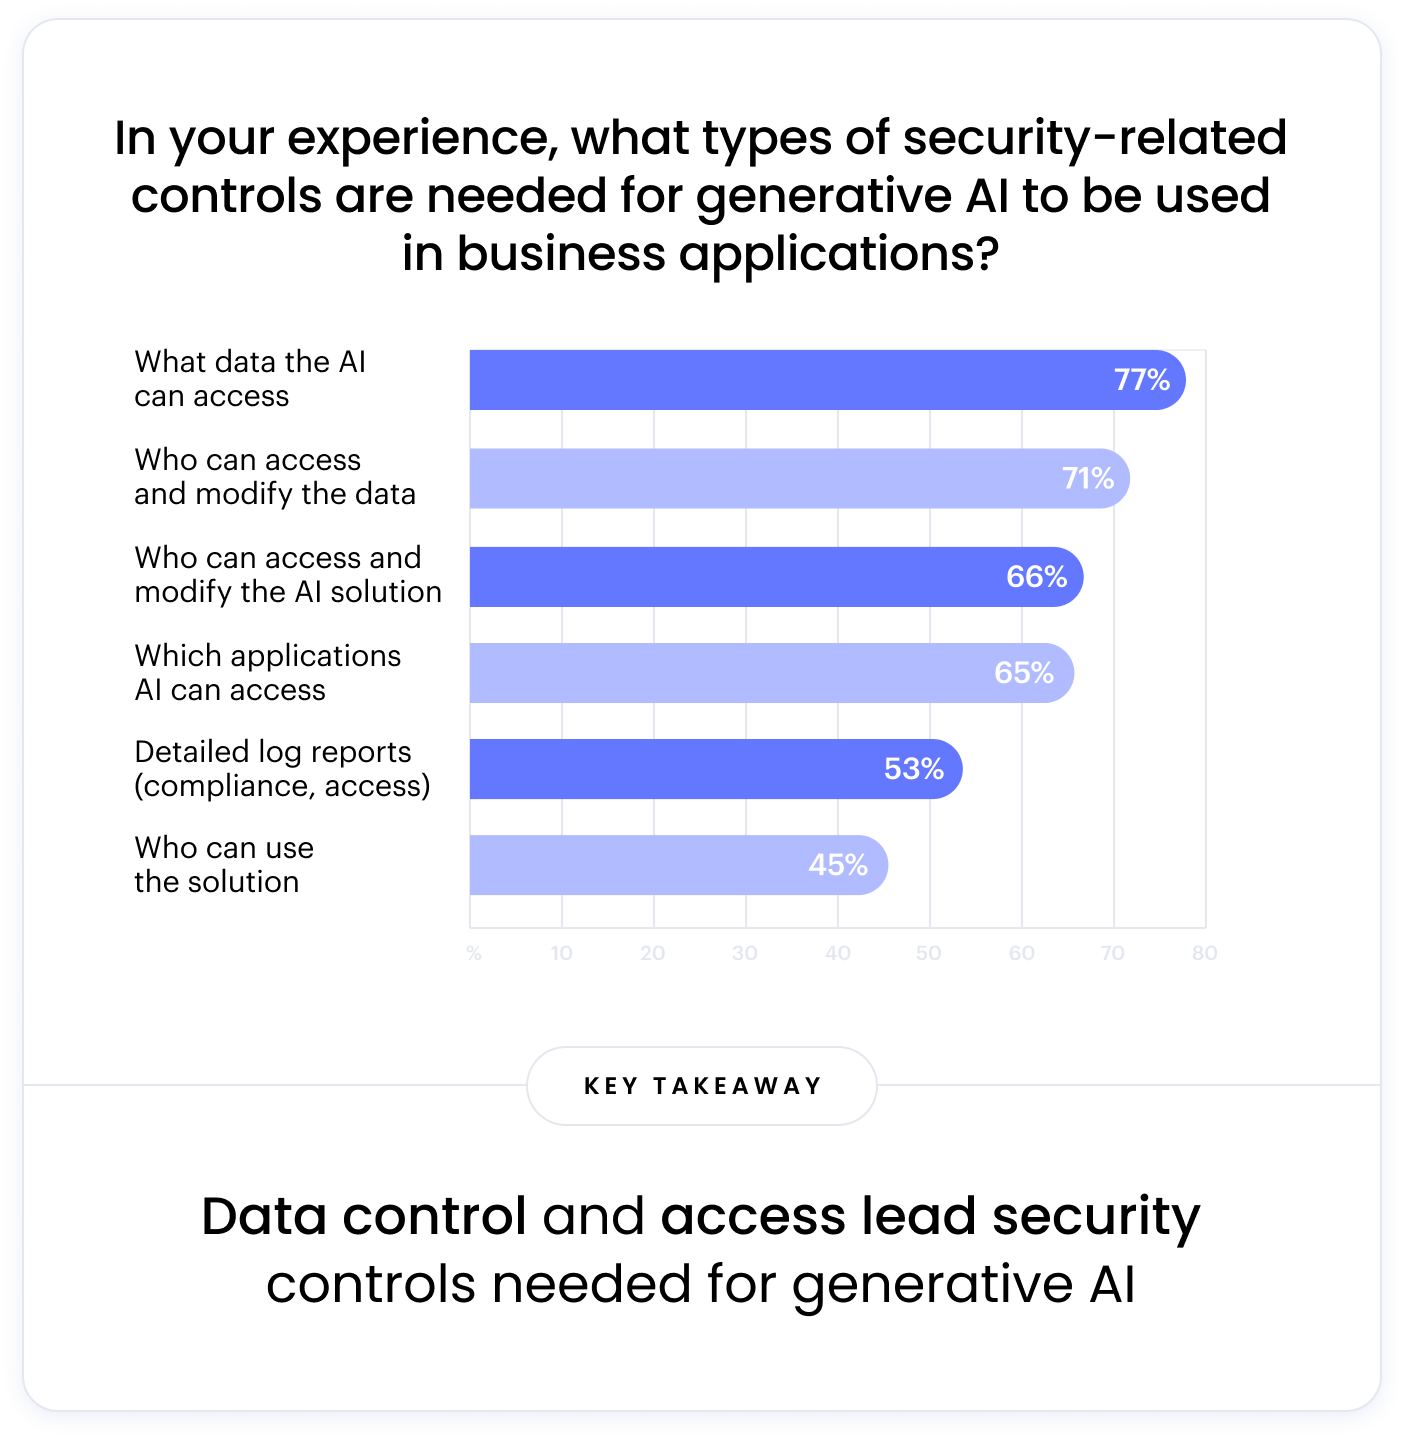 This is an image of the breakdown of security concerns and controls businesses have: - 77% of people believe it's important to control the data AI uses. - 71% think only authorized individuals should access and modify that data. - 66% want to control who can change the AI solution. - 65% want to control which applications the AI can access. - 53% want detailed log reports to monitor AI activity. - 45% want to control who can use the AI solution.